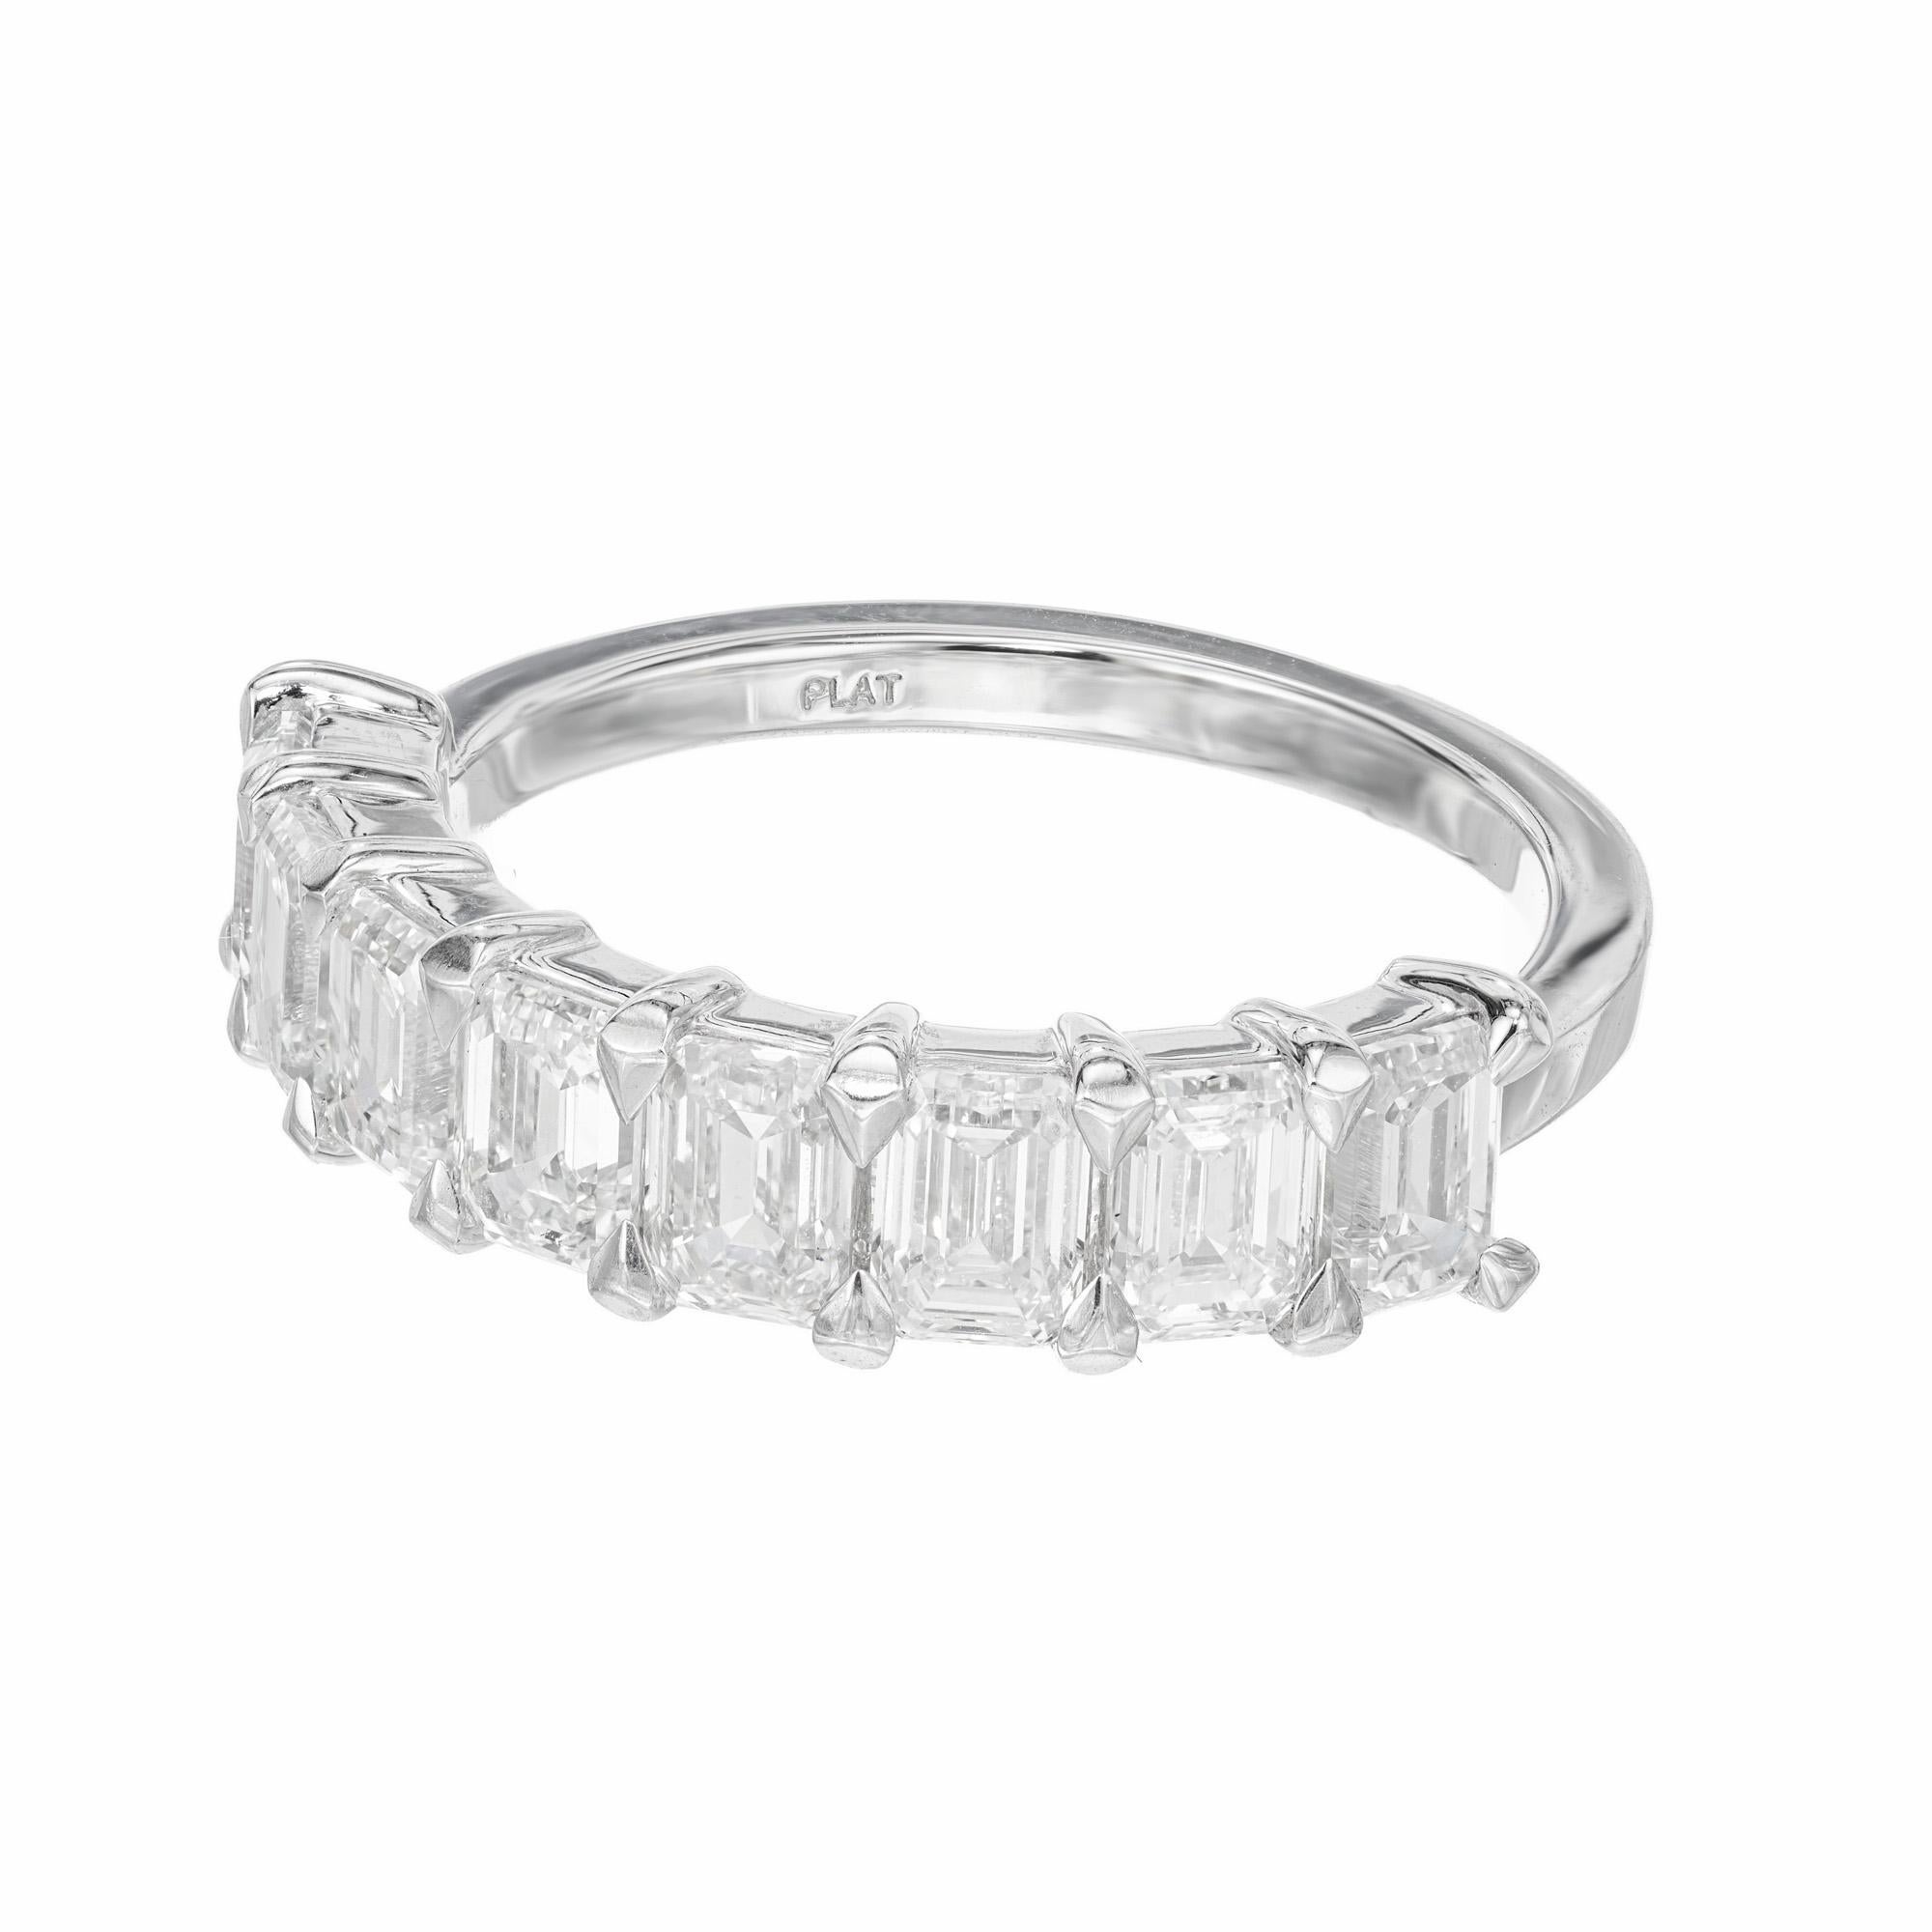 Peter Suchy 2.48 Carat Emerald Cut Diamond Platinum Wedding Band Ring In New Condition For Sale In Stamford, CT